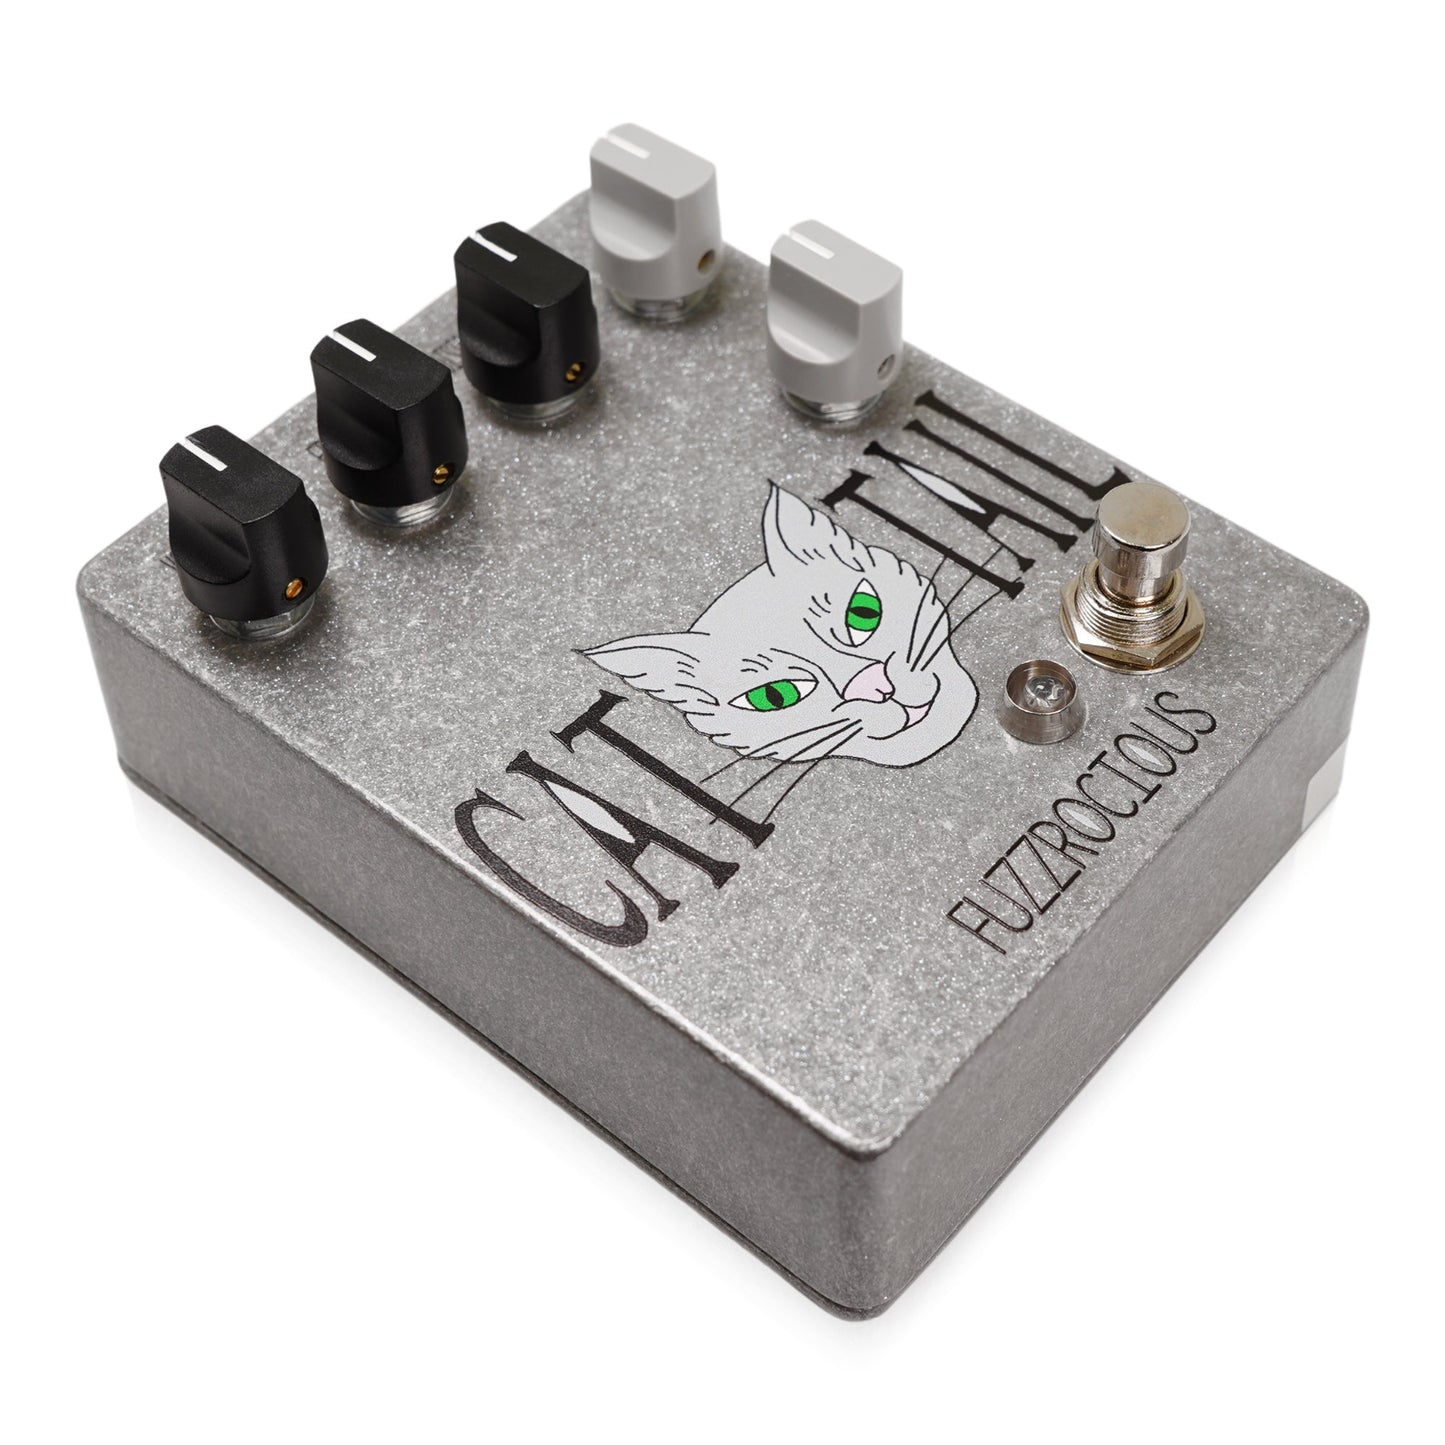 Fuzzrocious Pedals/Cat Tail